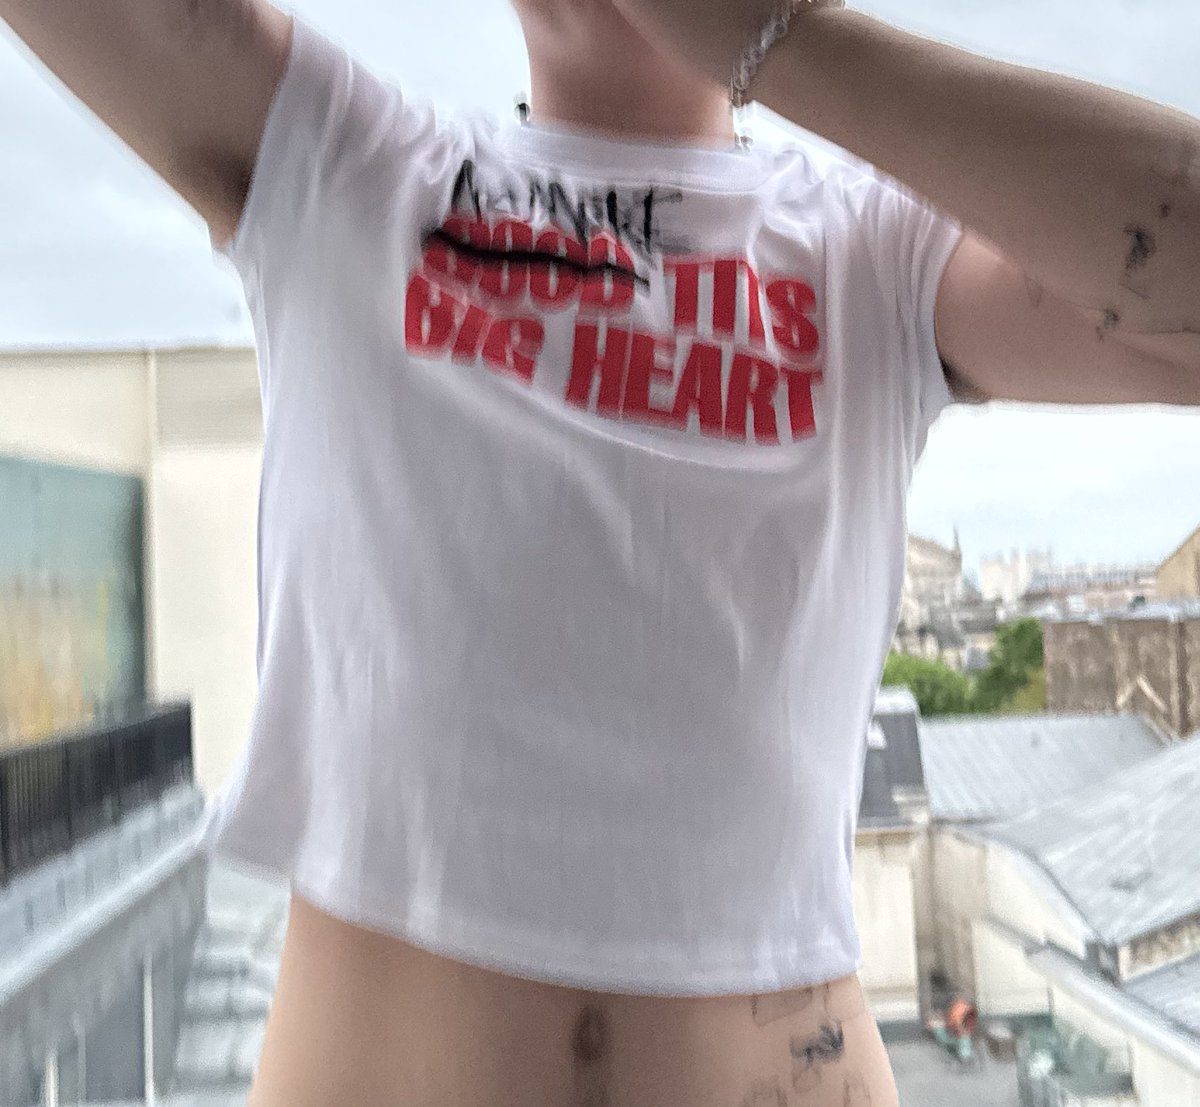 i had top surgery 5 days before my reneé rapp show was supposed to be, so i wasn’t able to go. luckily, i have the best friends in the world. they got me this shirt. no more tits, big heart ❤️